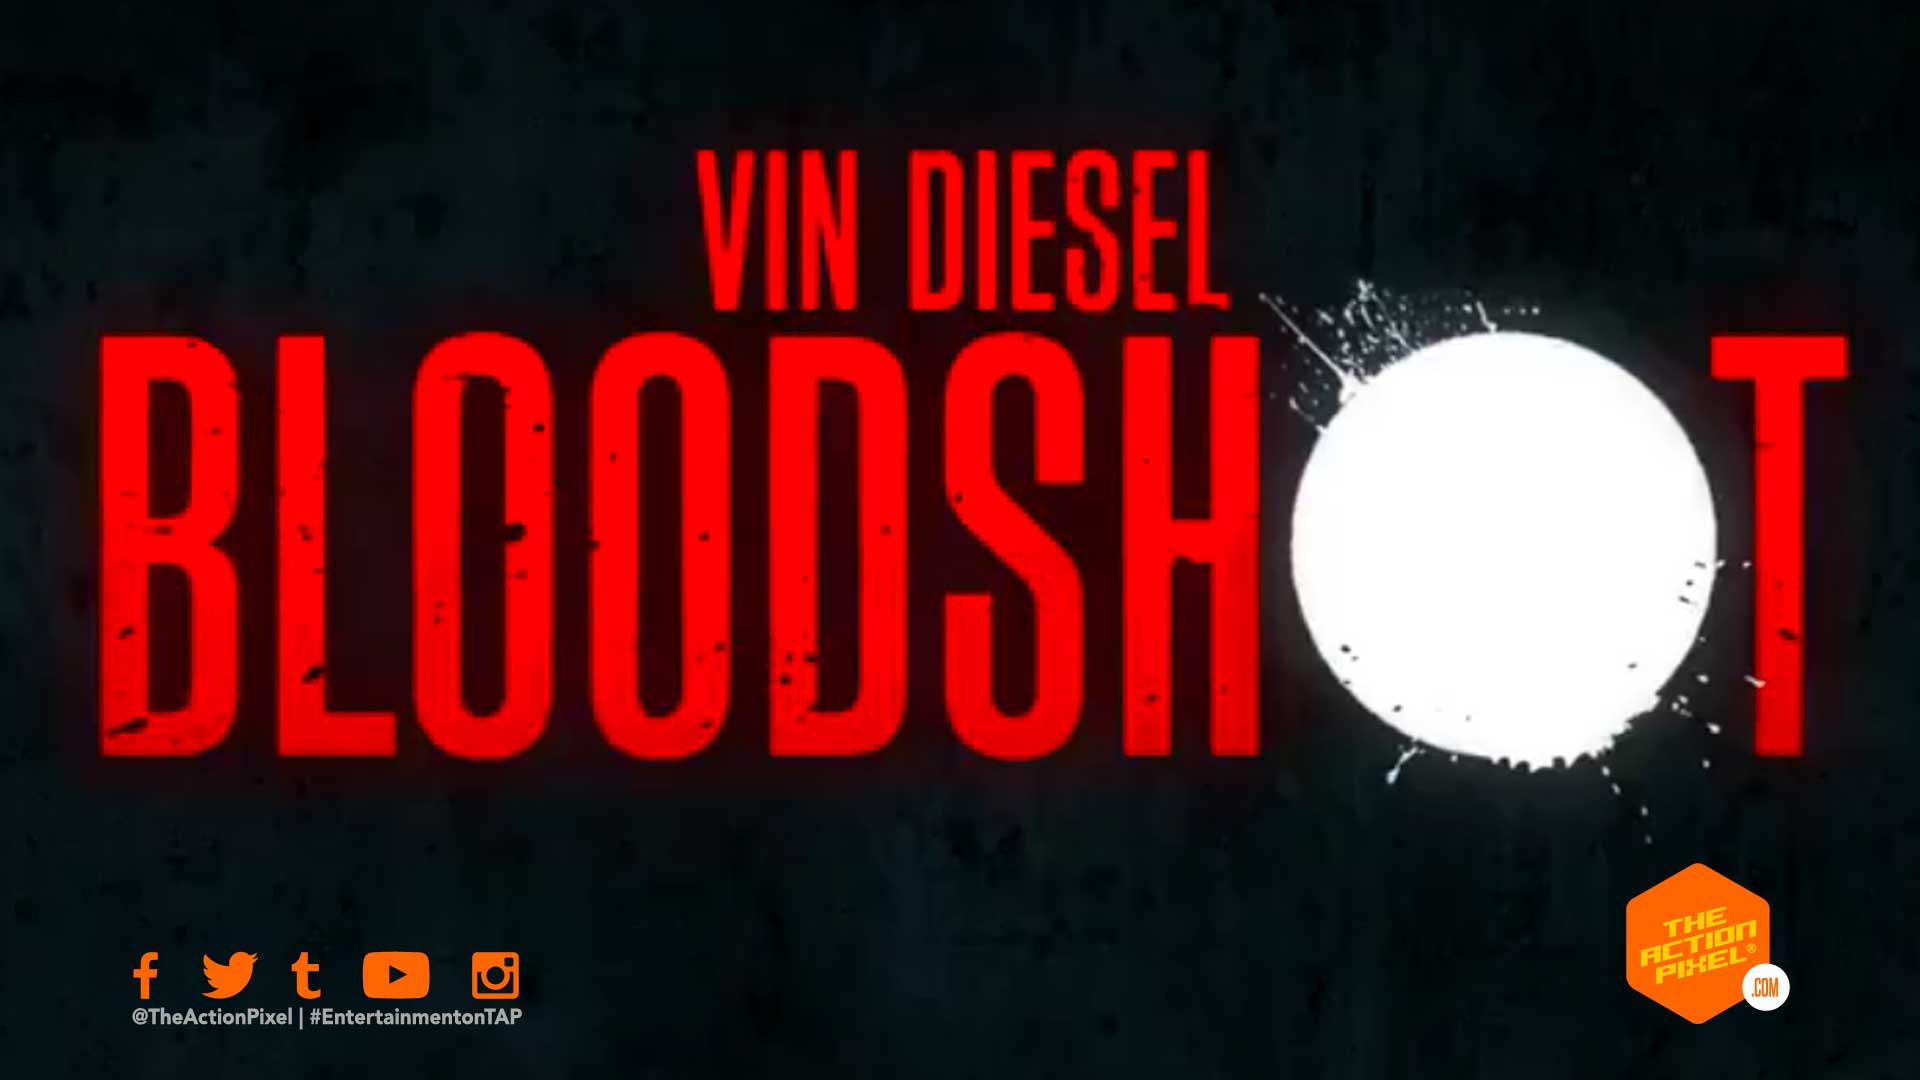 bloodshot, vin diesel, sony pictures, teaser ,teaser trailer, bloodshot teaser trailer, the action pixel, dinesh shamdasani, featured, the action pixel, entertainment on tap,